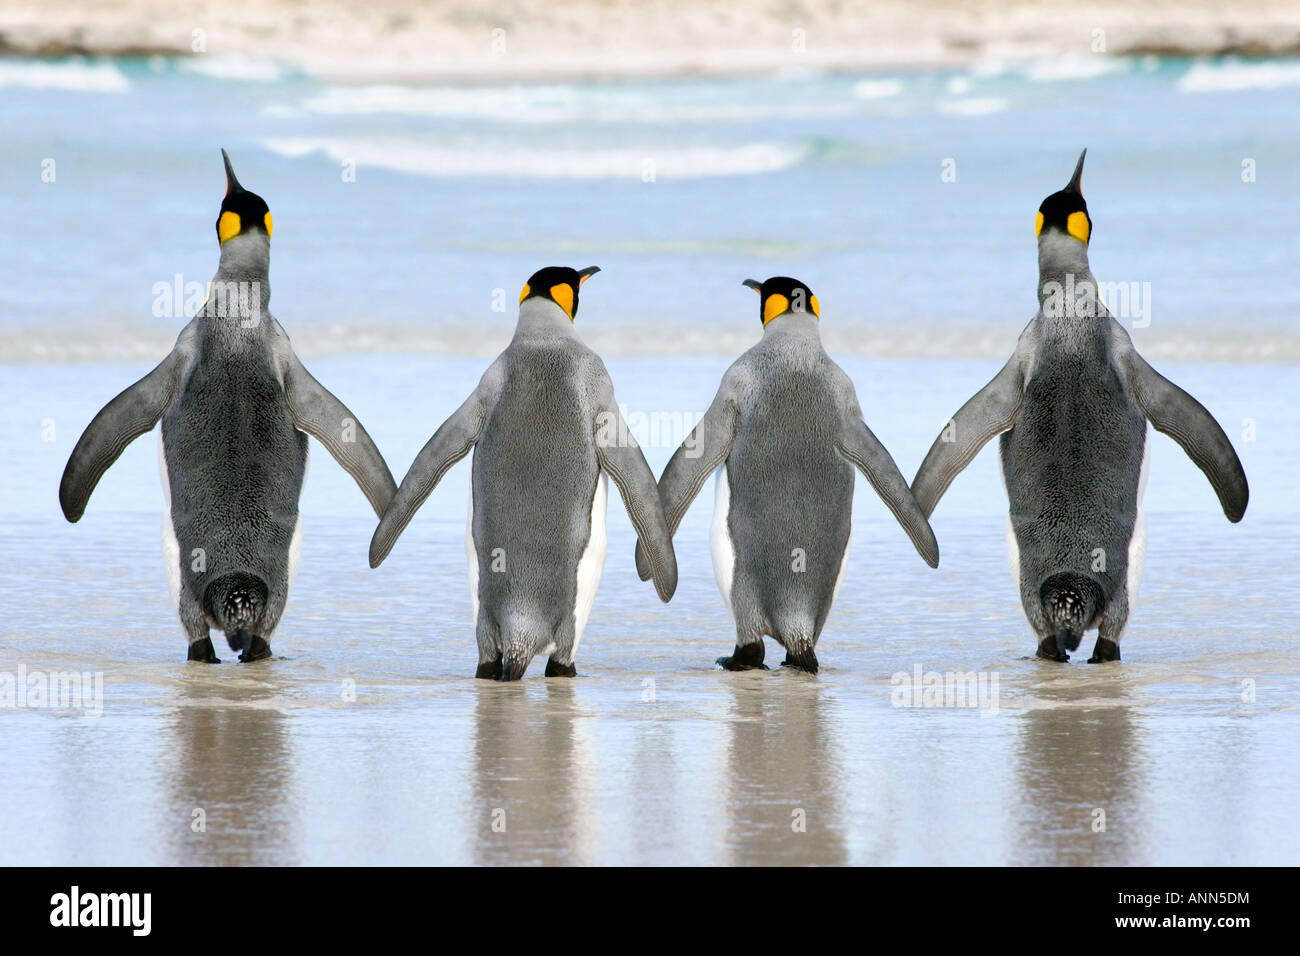 A group of 4 King Penguin crossing the sands hand in hand Stock Photo